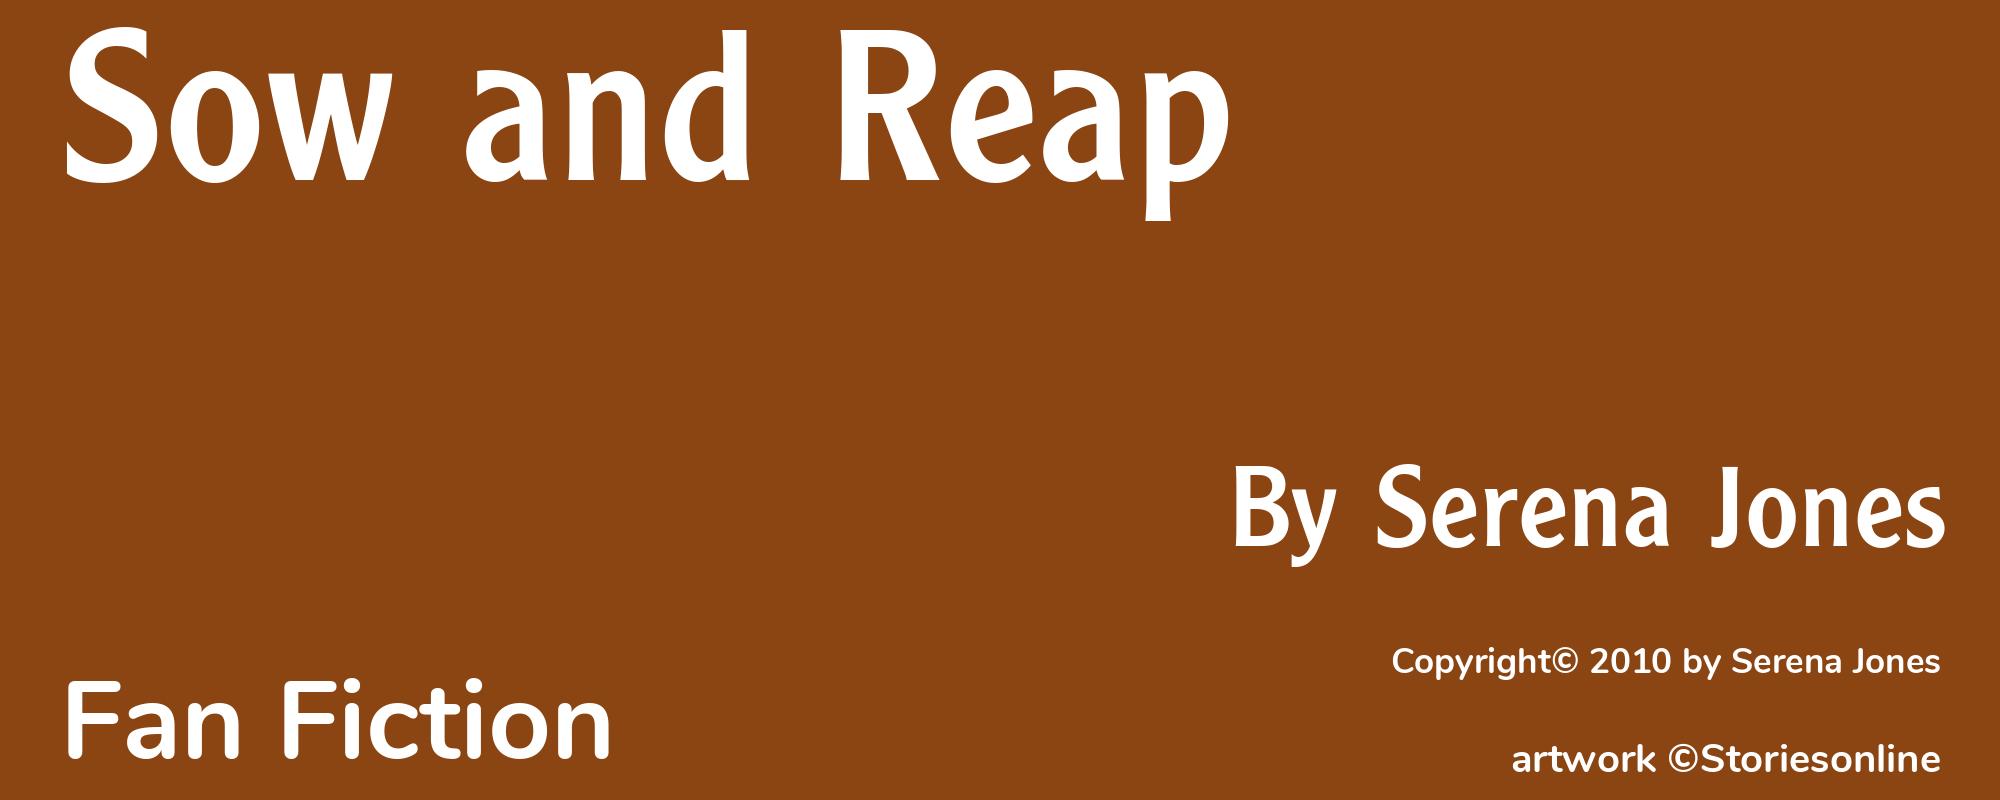 Sow and Reap - Cover